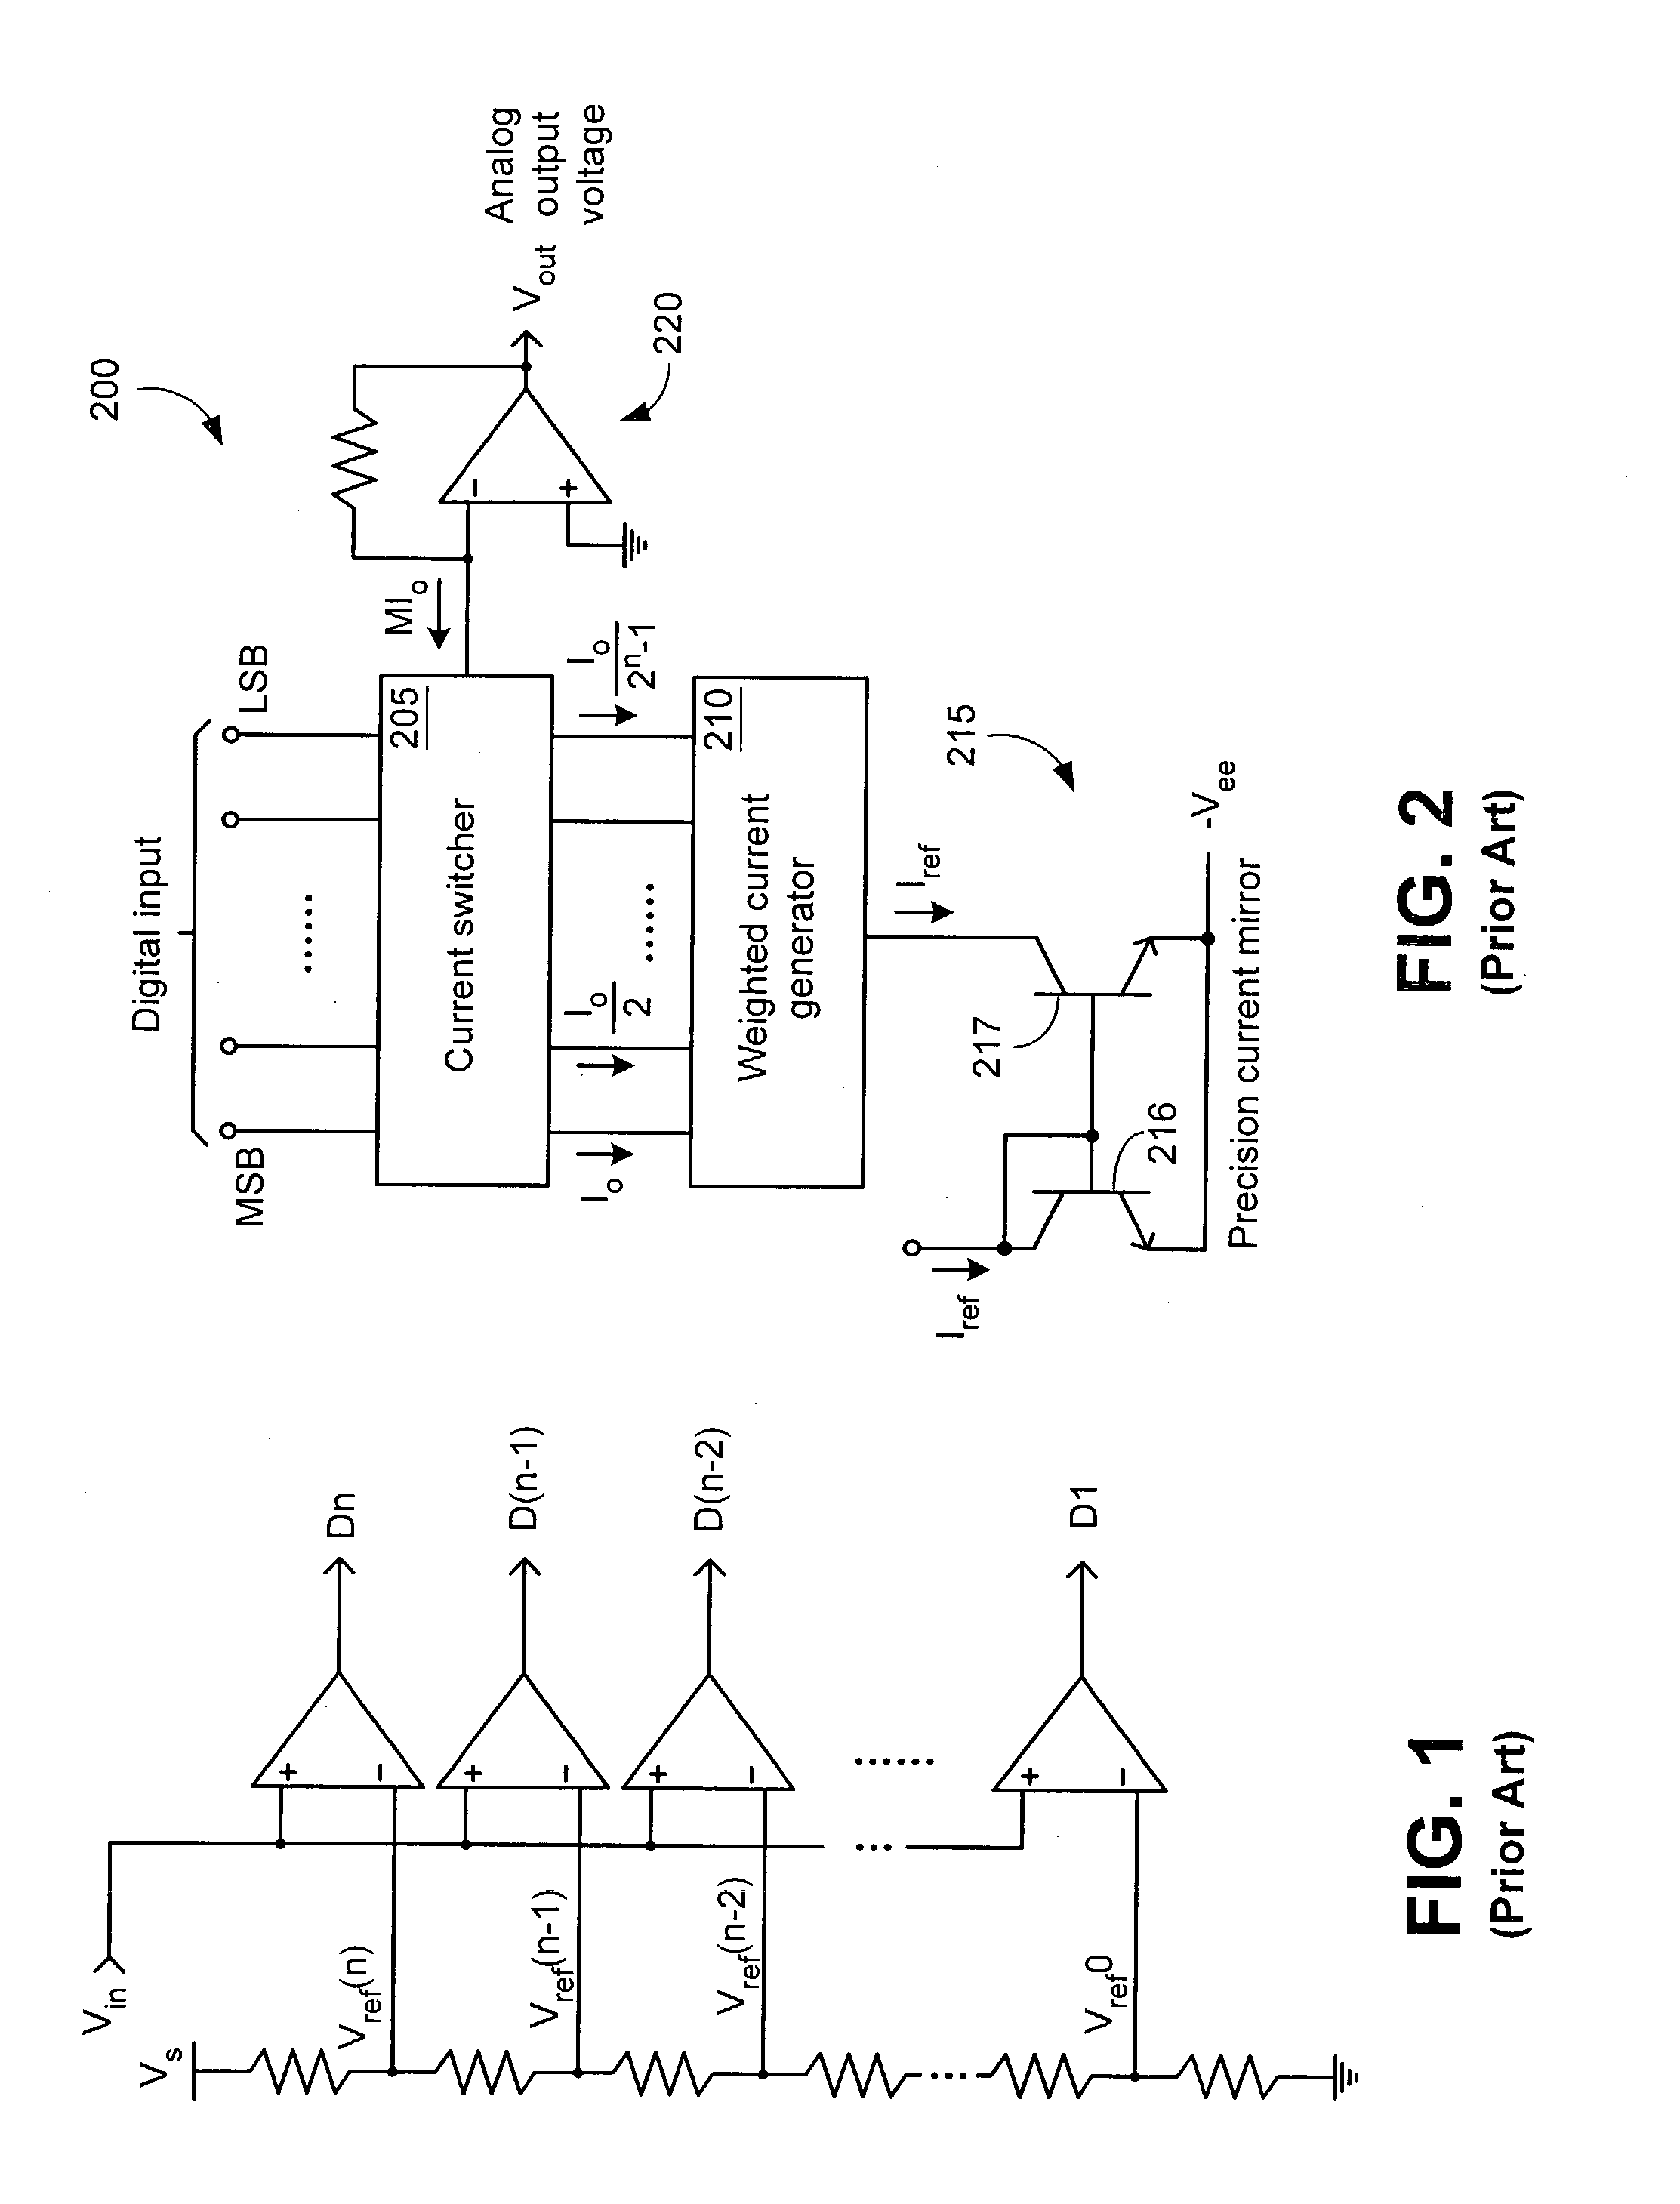 Floating-gate reference circuit